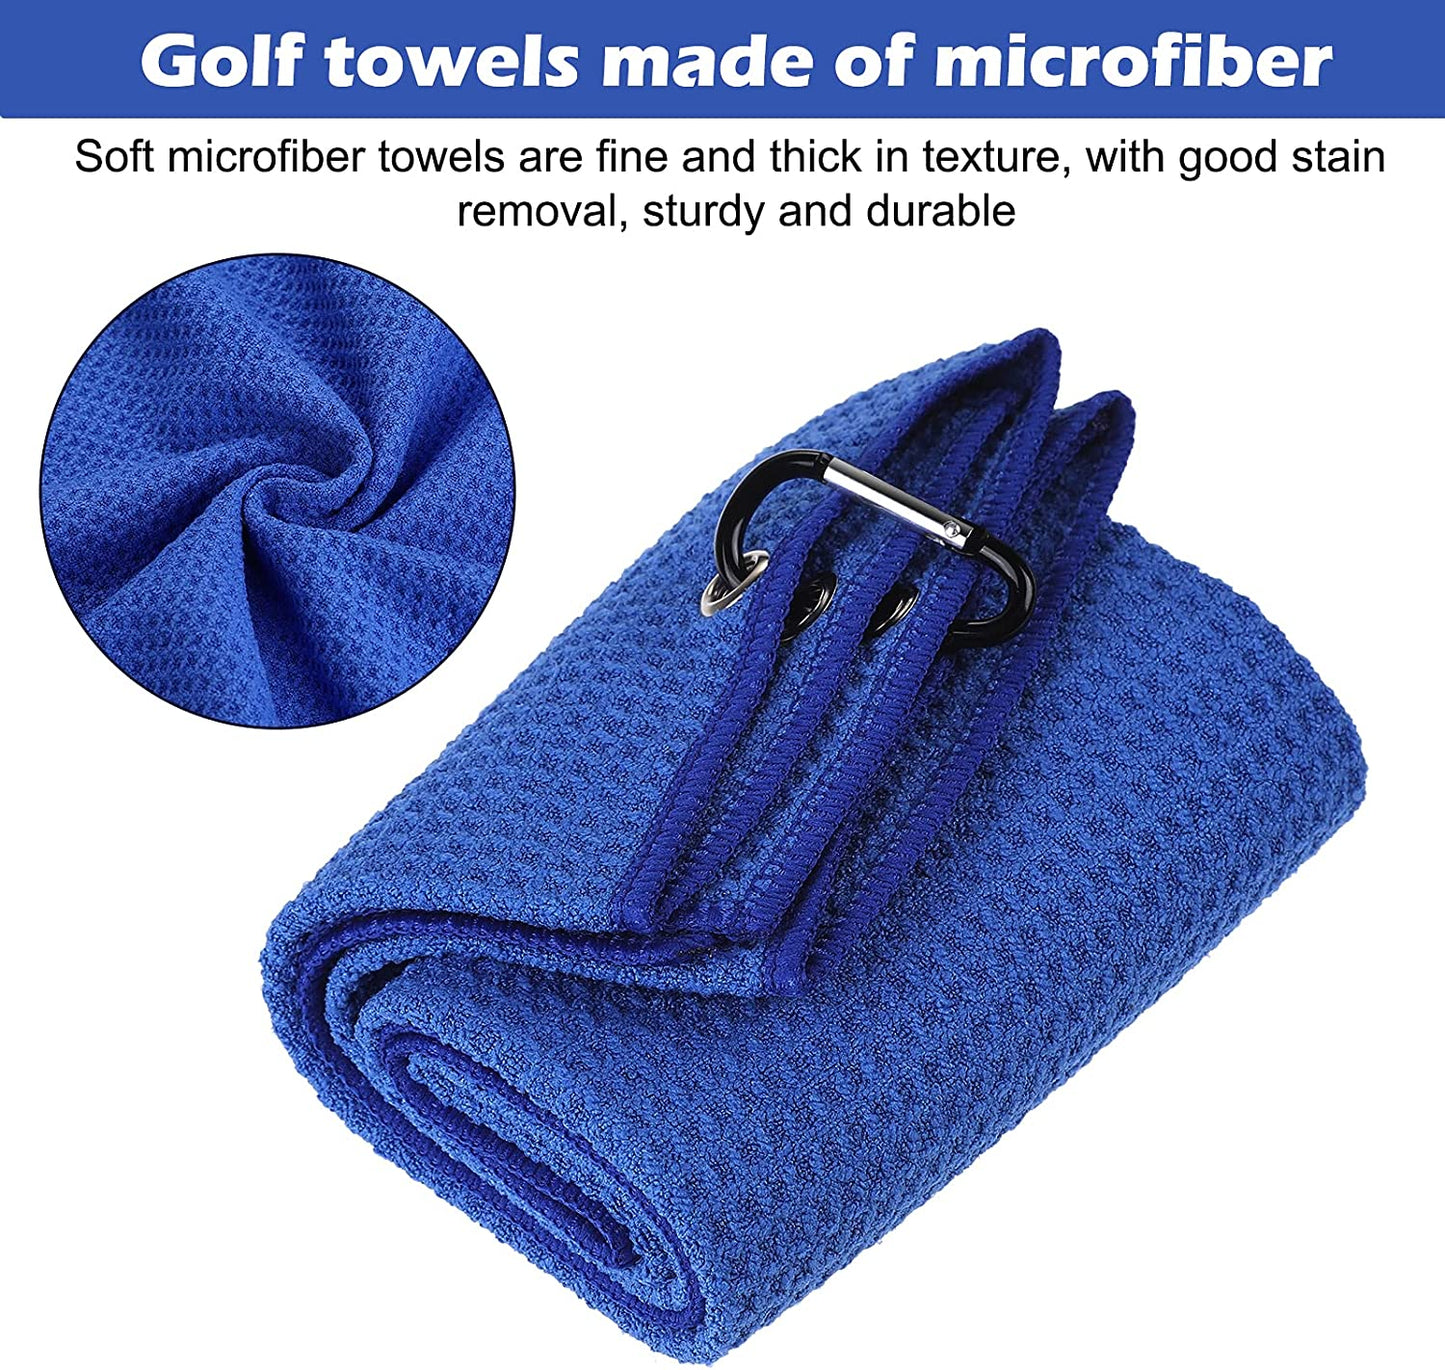 13 in 1 Golf Accessories - Golf Towel and Golf Club Brush, Golf Cleaning Tool Kit, Golf Ball Cleaner Pouch, Black …